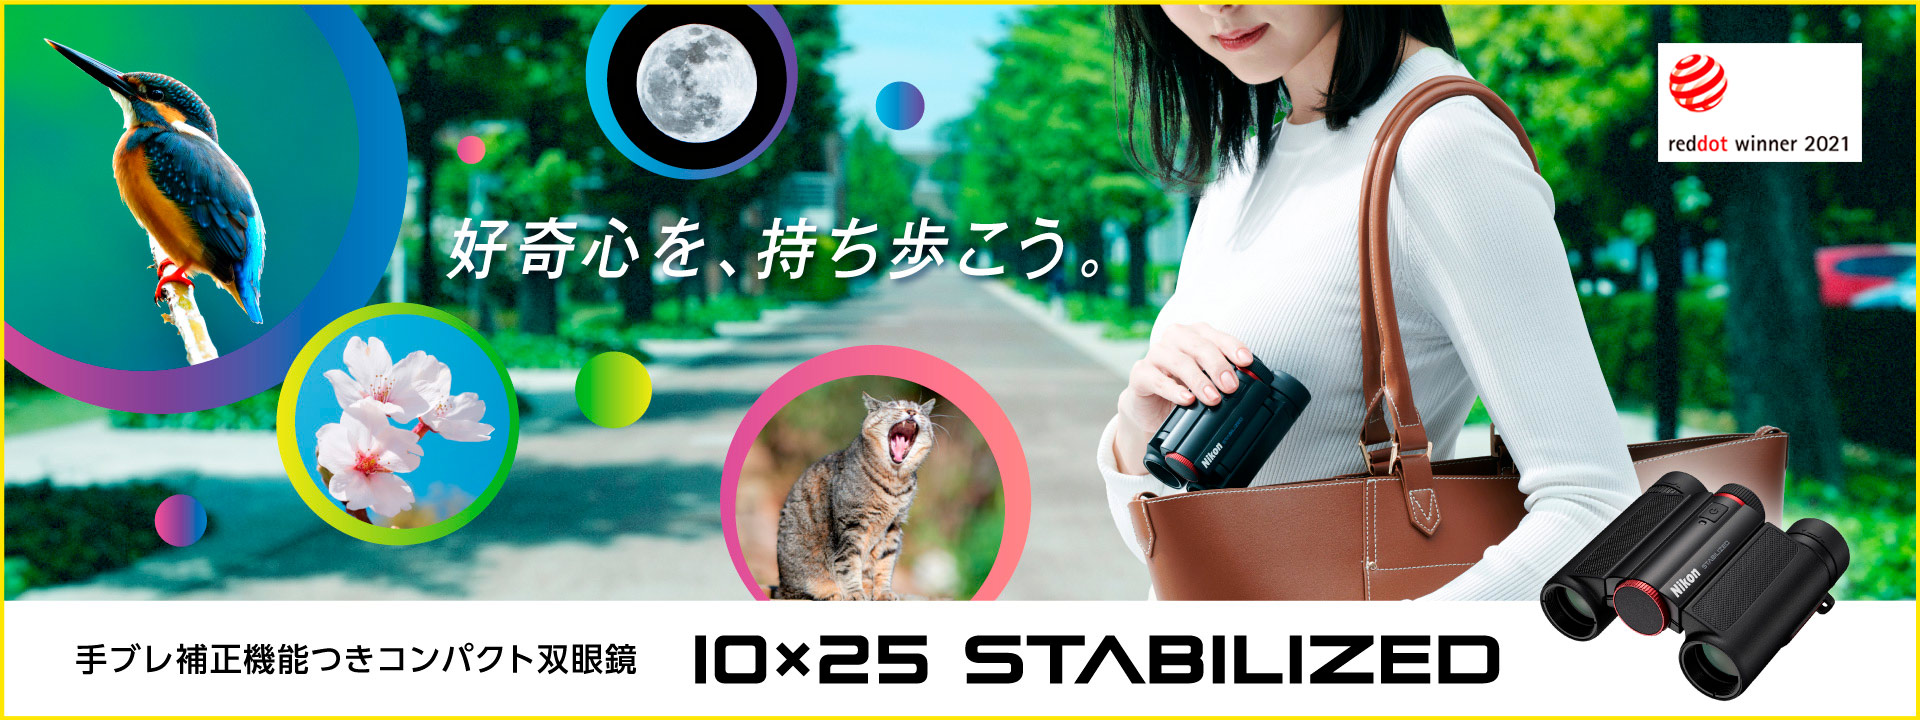 10x25 STABILIZED - 概要 | 双眼鏡・望遠鏡・レーザー距離計 | ニコンイメージング